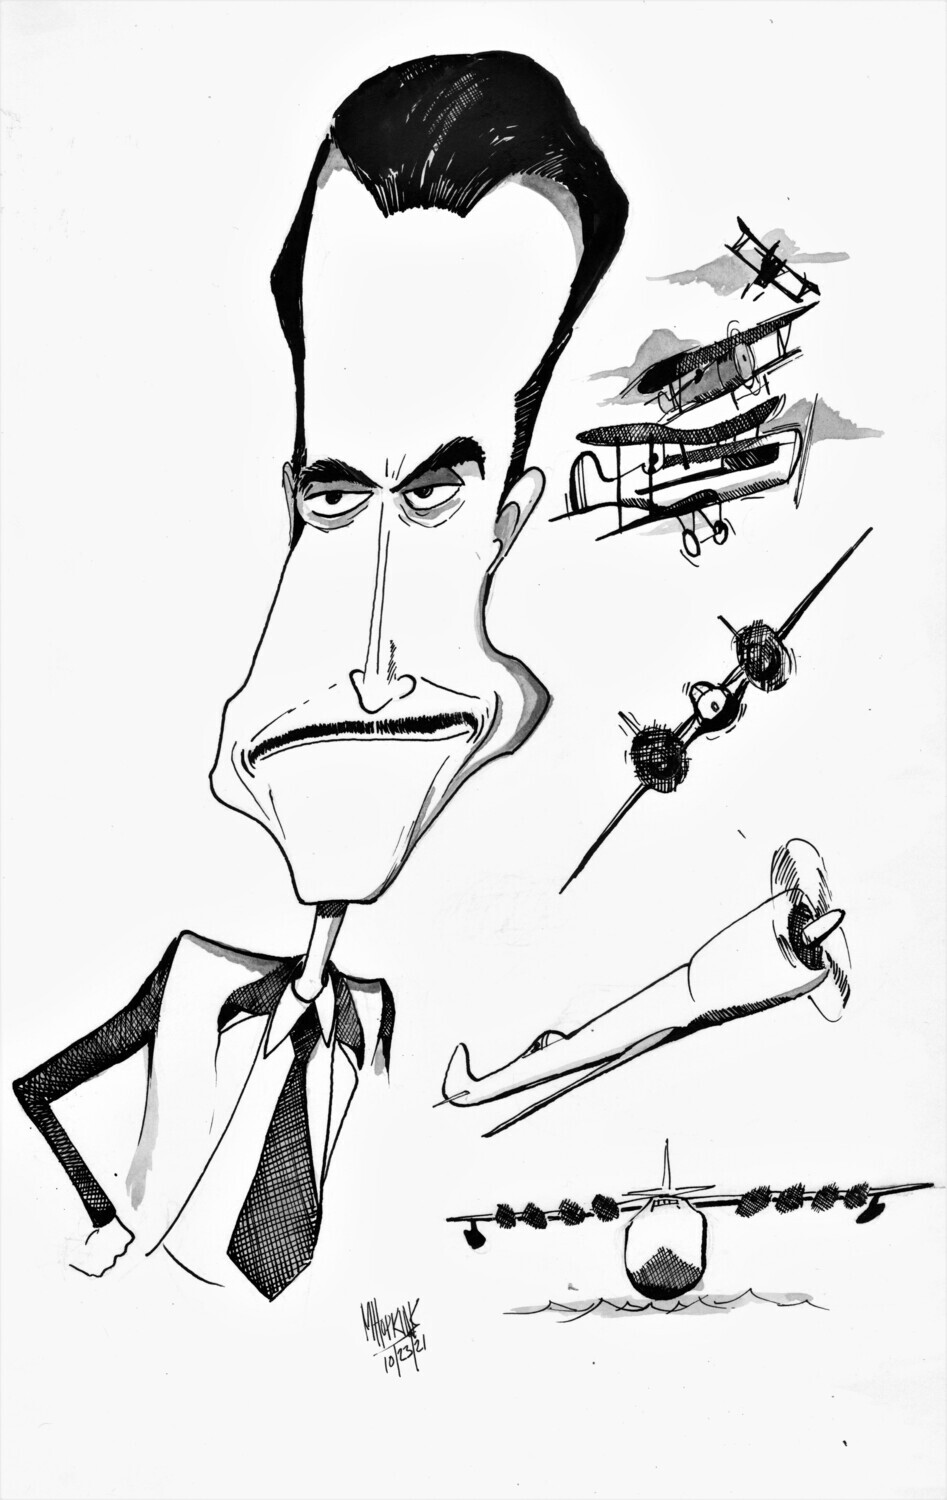 Howard Hughes - Limited Edition Signed Giclée Prints from $50 to $75